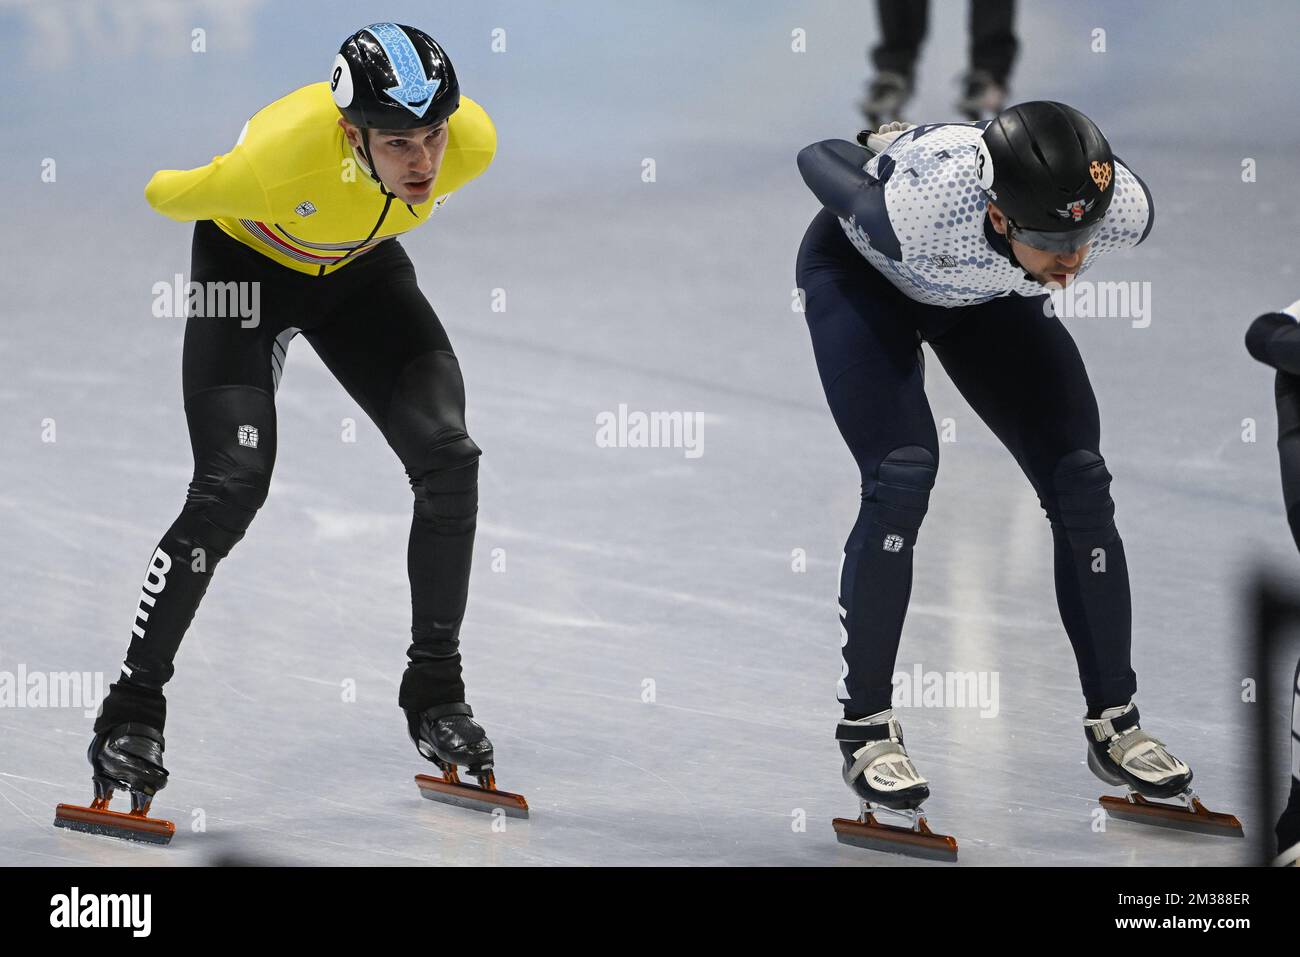 Belgian shorttrack skater Stijn Desmet pictured in action during the men's  Shorttrack 1500m semi final at the Beijing 2022 Winter Olympics in Beijing,  China, Wednesday 09 February 2022. The winter Olympics are